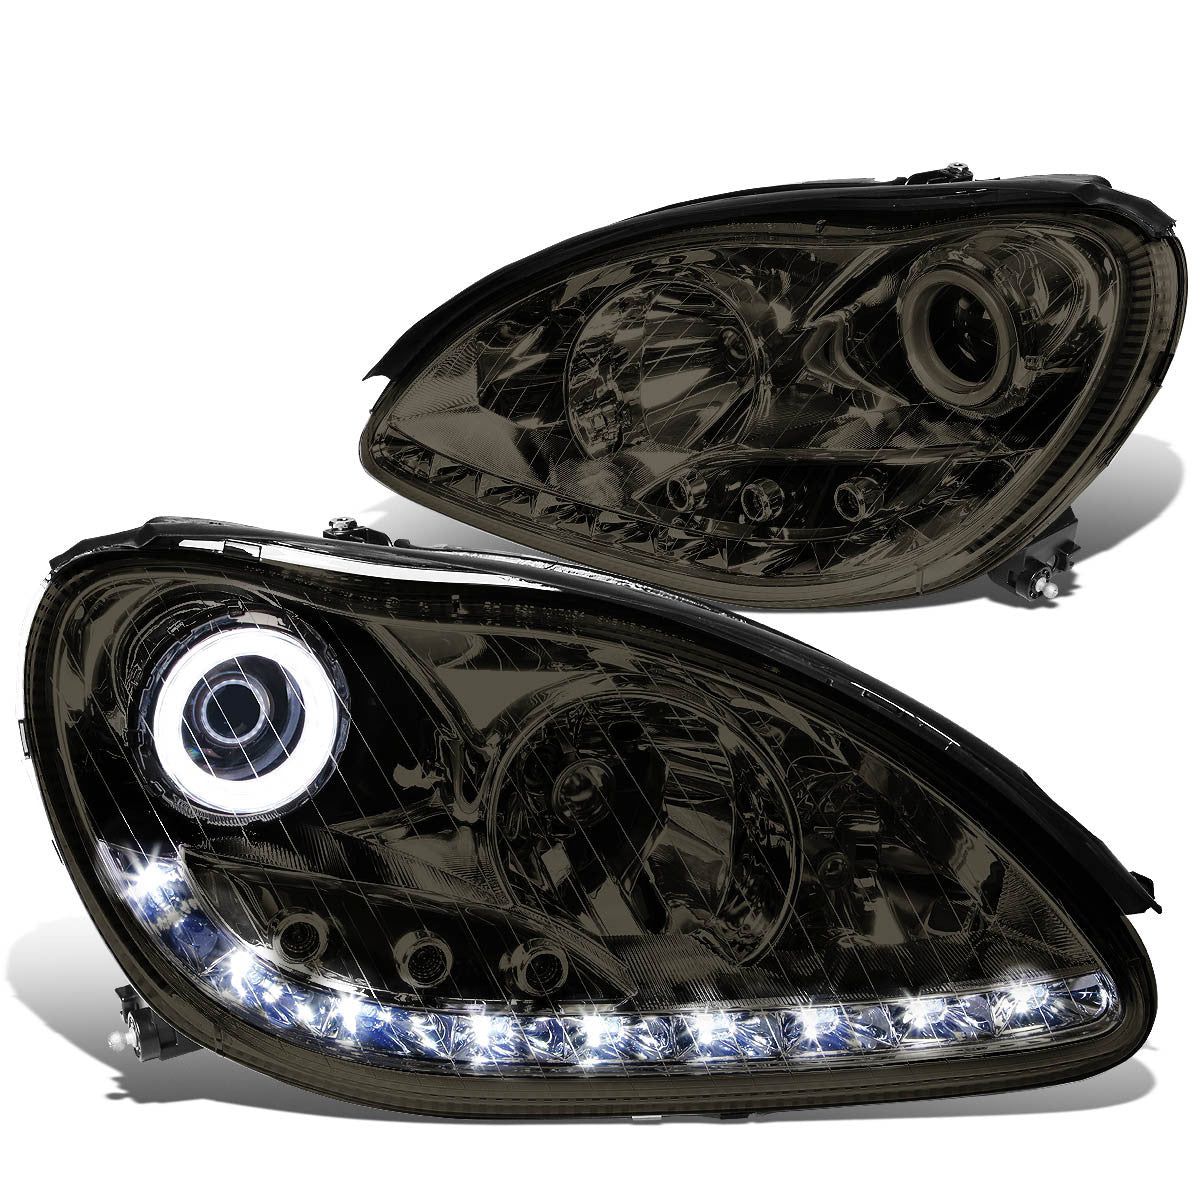 LED DRL Halo Projector Headlights<br>00-06 Mercedes Benz S430 S500 S600